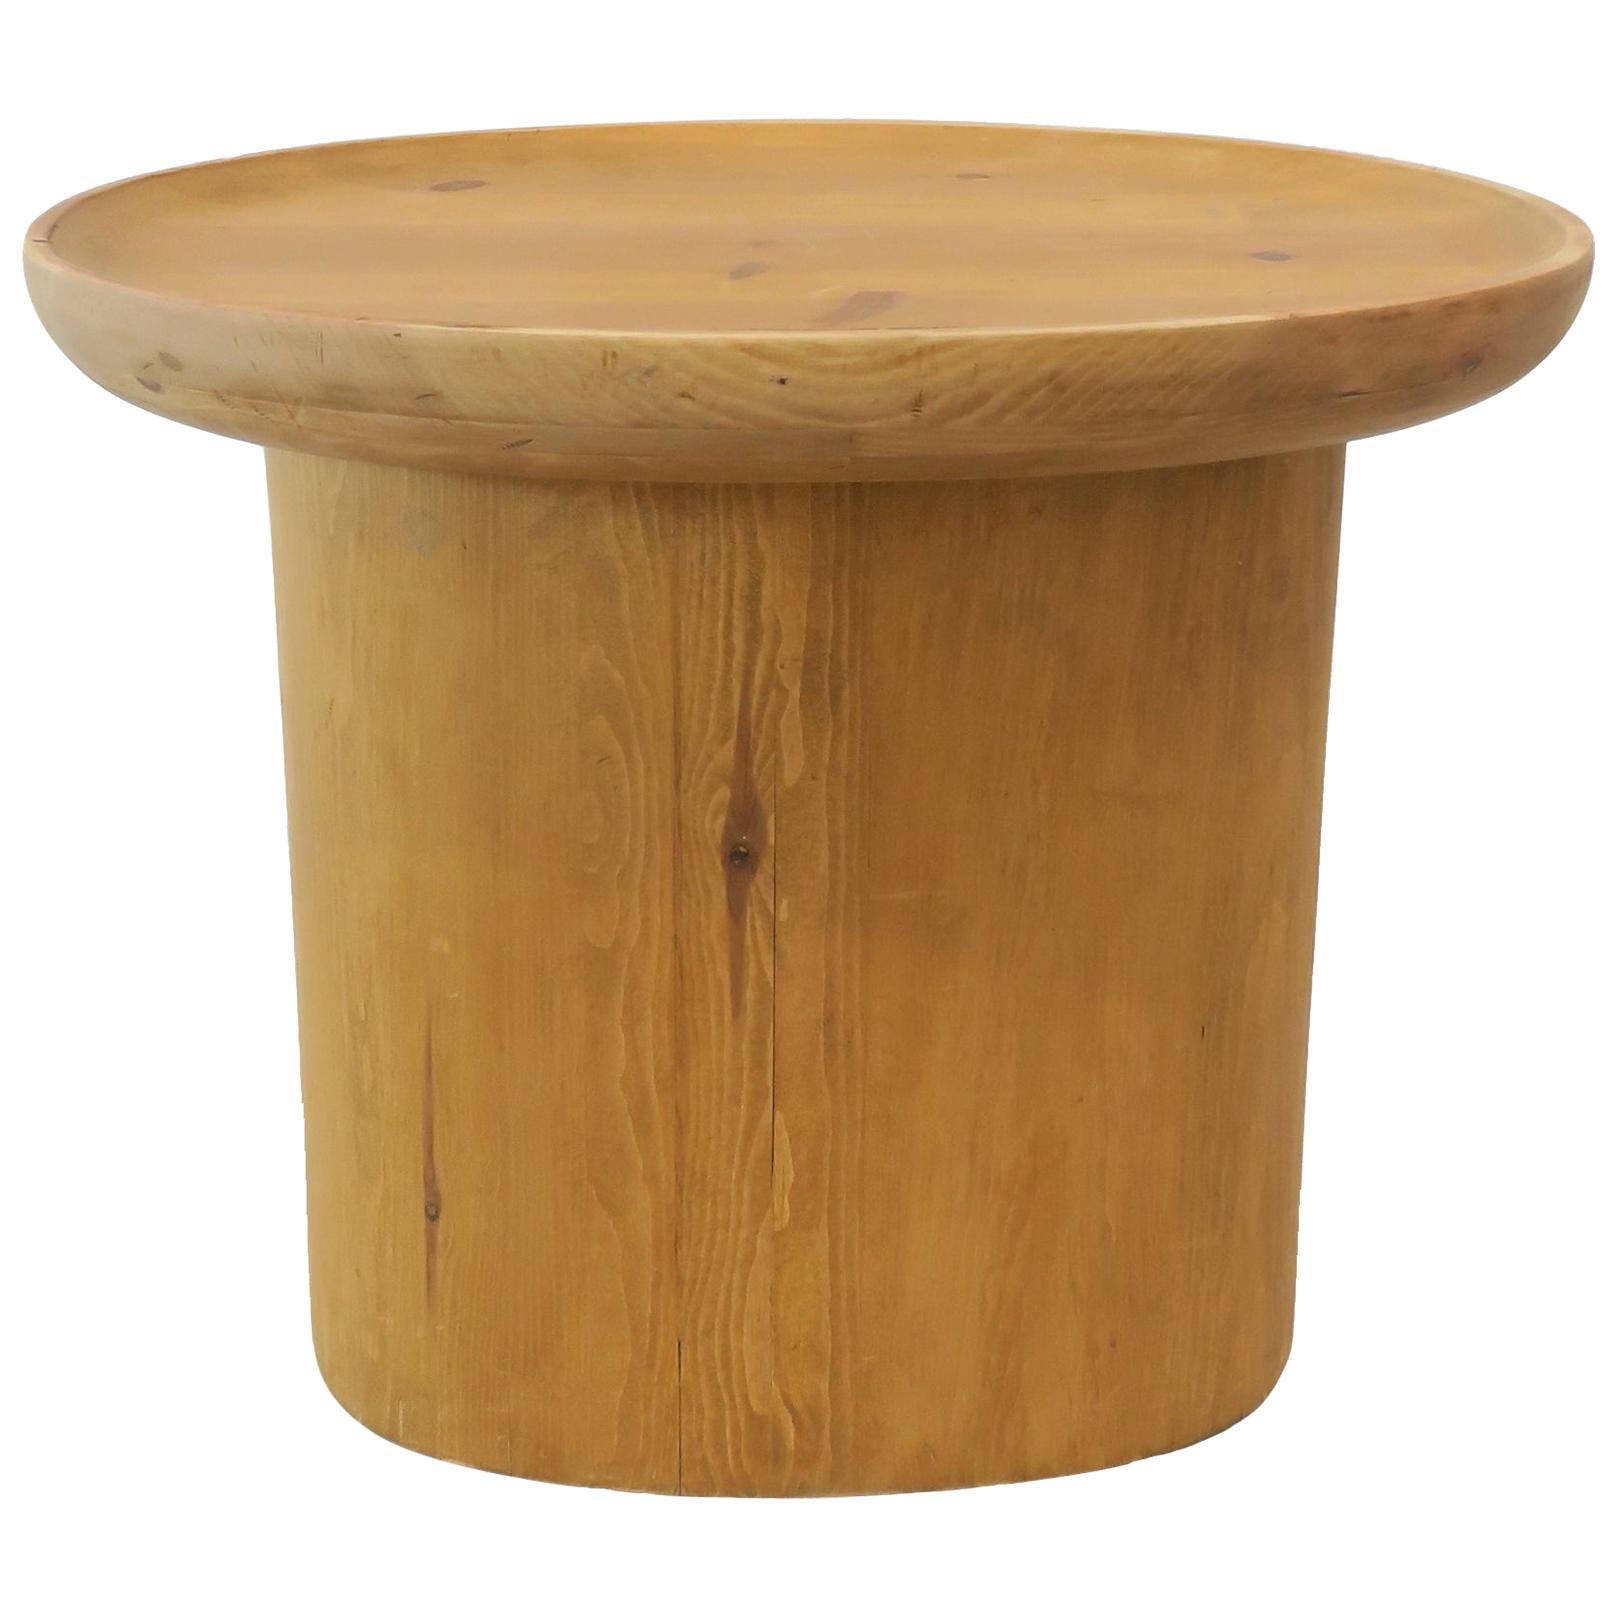 Modern Pine Oval Side Table by Martin and Brockett, in Natural Pine finish For Sale